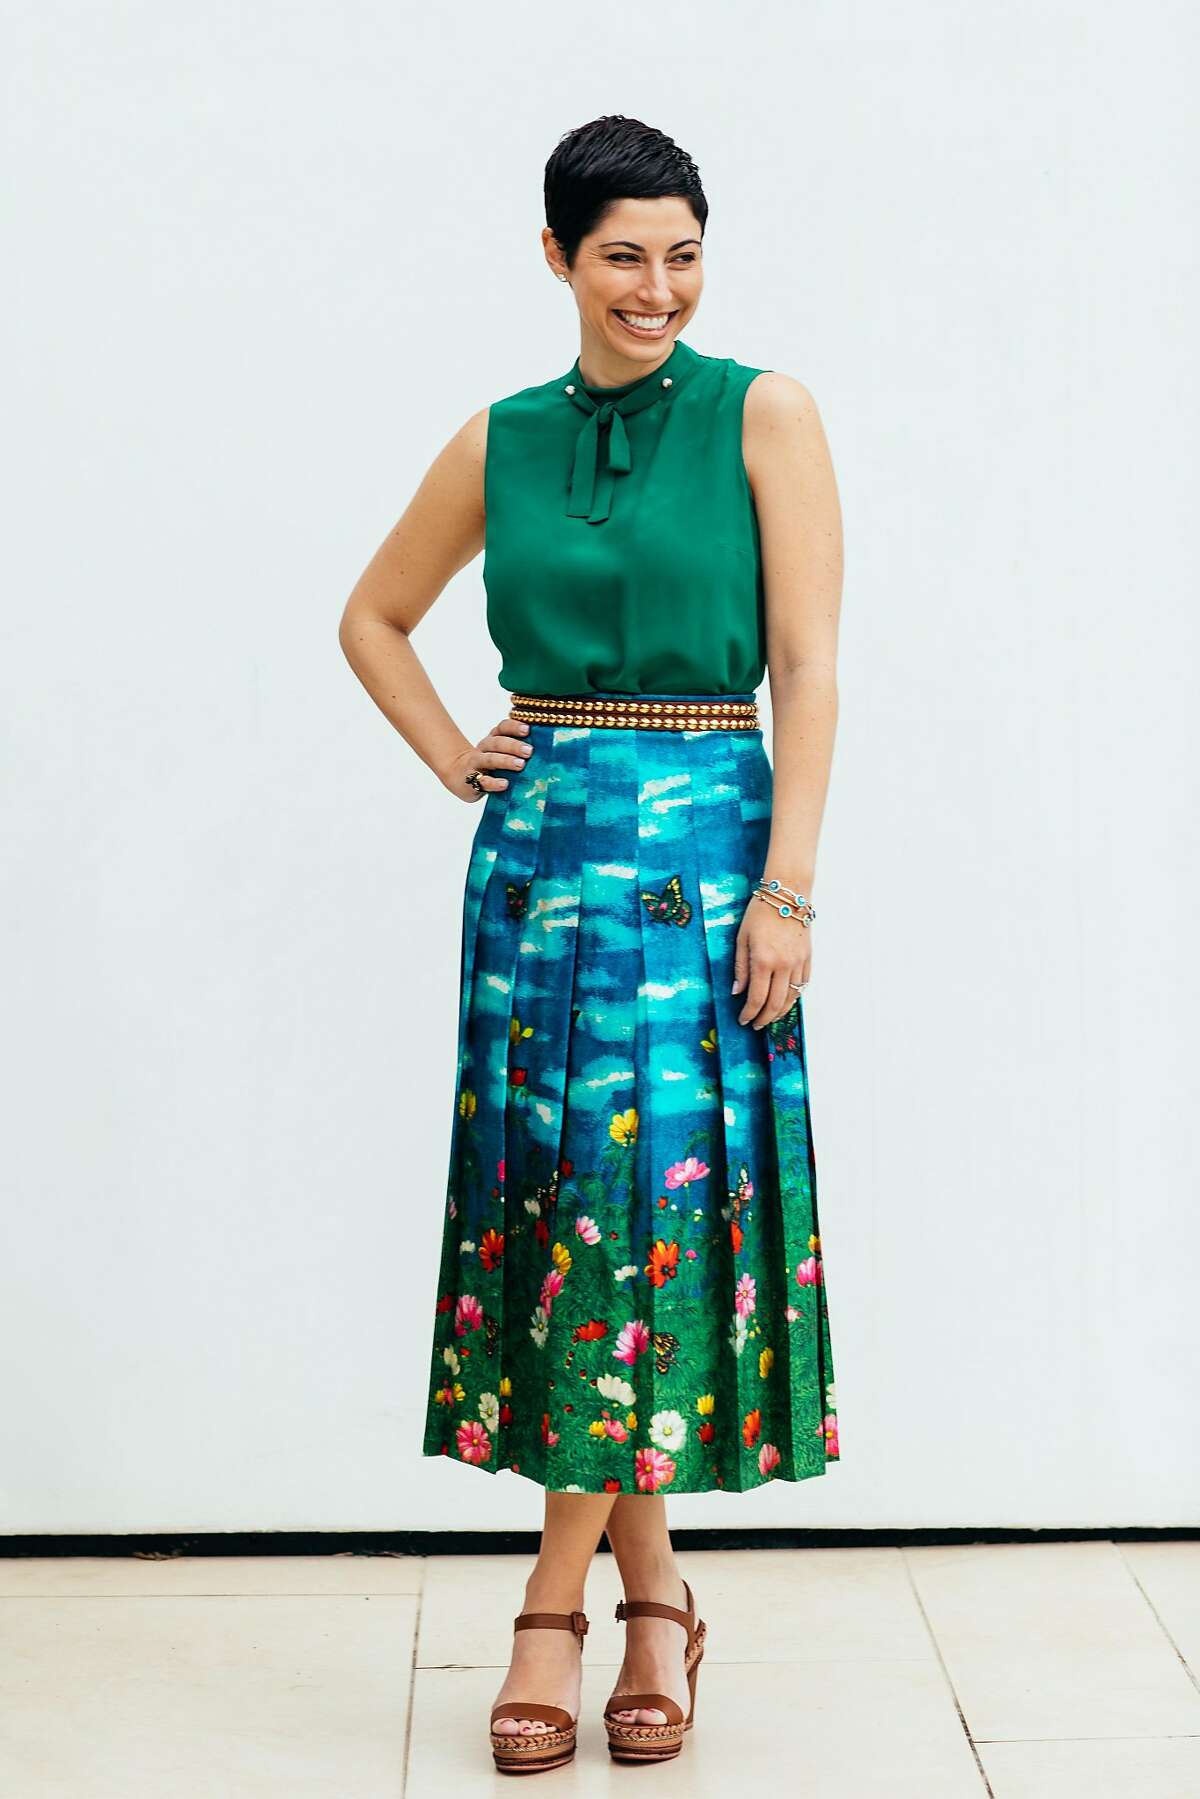 Chrisa Pappas of Sacramento writes a blog called Chrisascut and operates a consignment clothing store online -- www.thestylespin.com -- selling designer apparel from her personal collection. �Here, she wears a Gucci green top and floral skirt, Burberry belt and Christian Louboutin shoes.